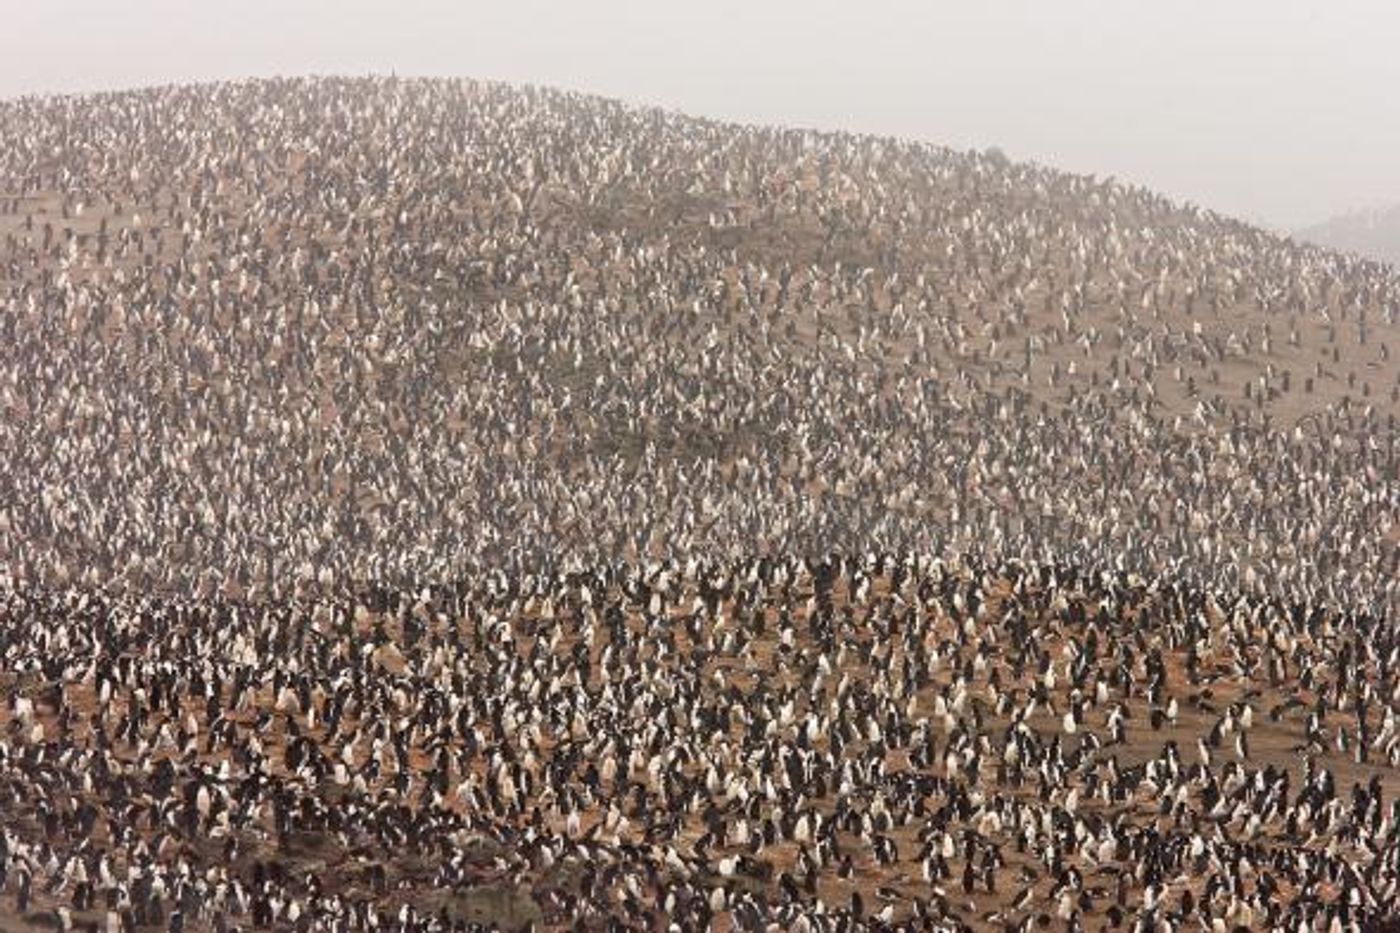 The chinstrap penguin colony on Zavodovski Island is one of the largest penguin colonies on Earth, shown here before the eruption.  PHOTOGRAPH BY MARIA STENZEL, NATIONAL GEOGRAPHIC CREATIVE